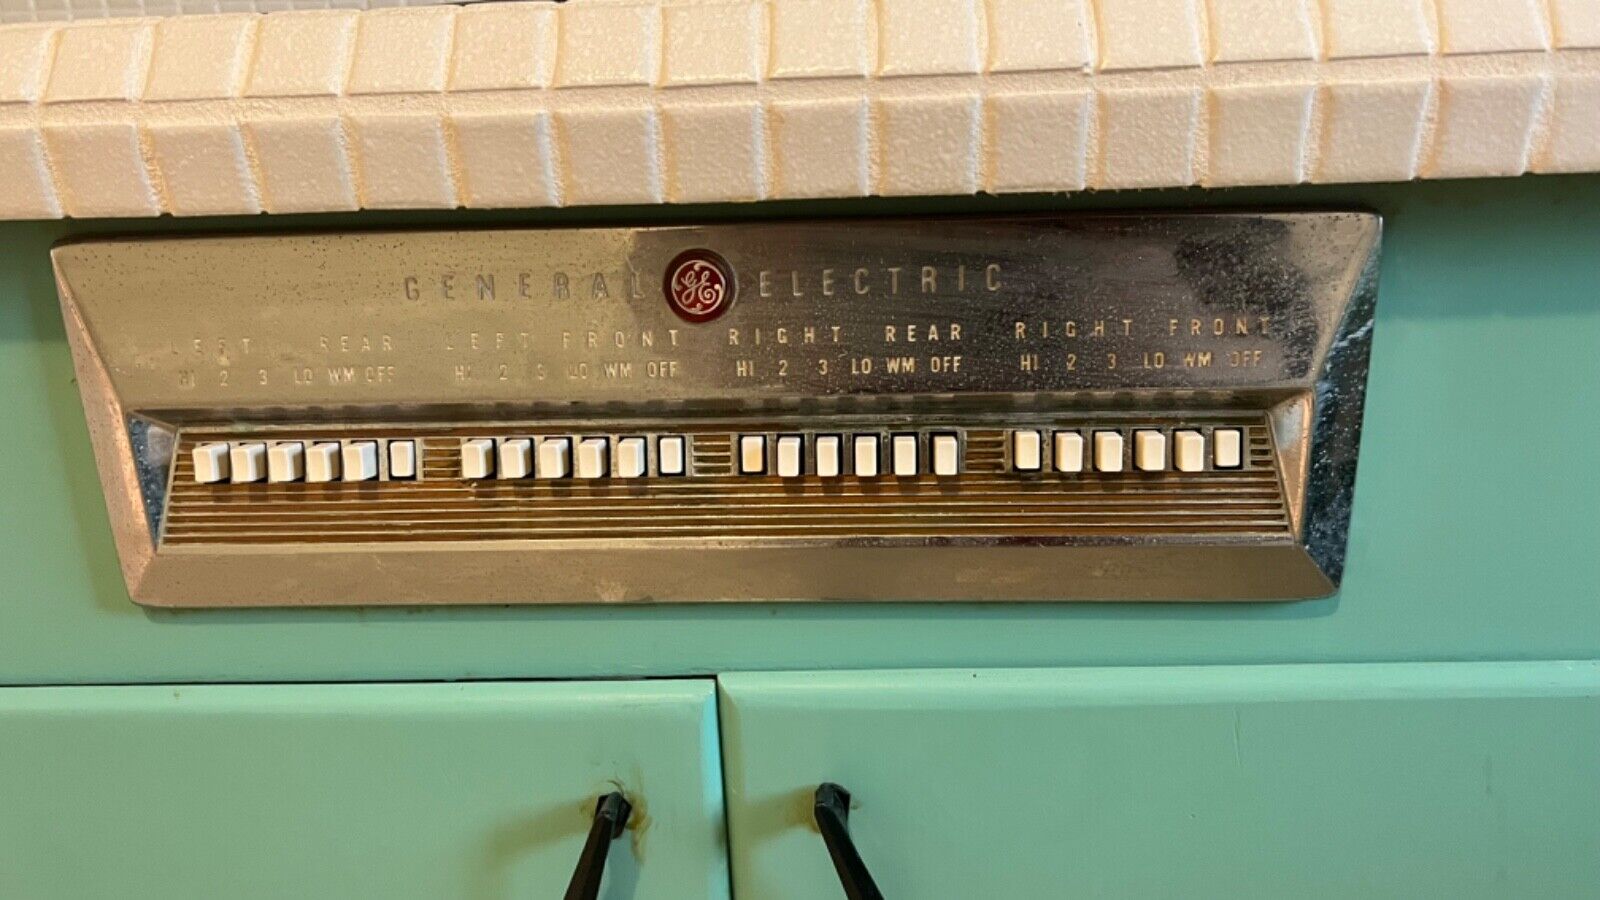 GE vintage electric stove 1950’s 